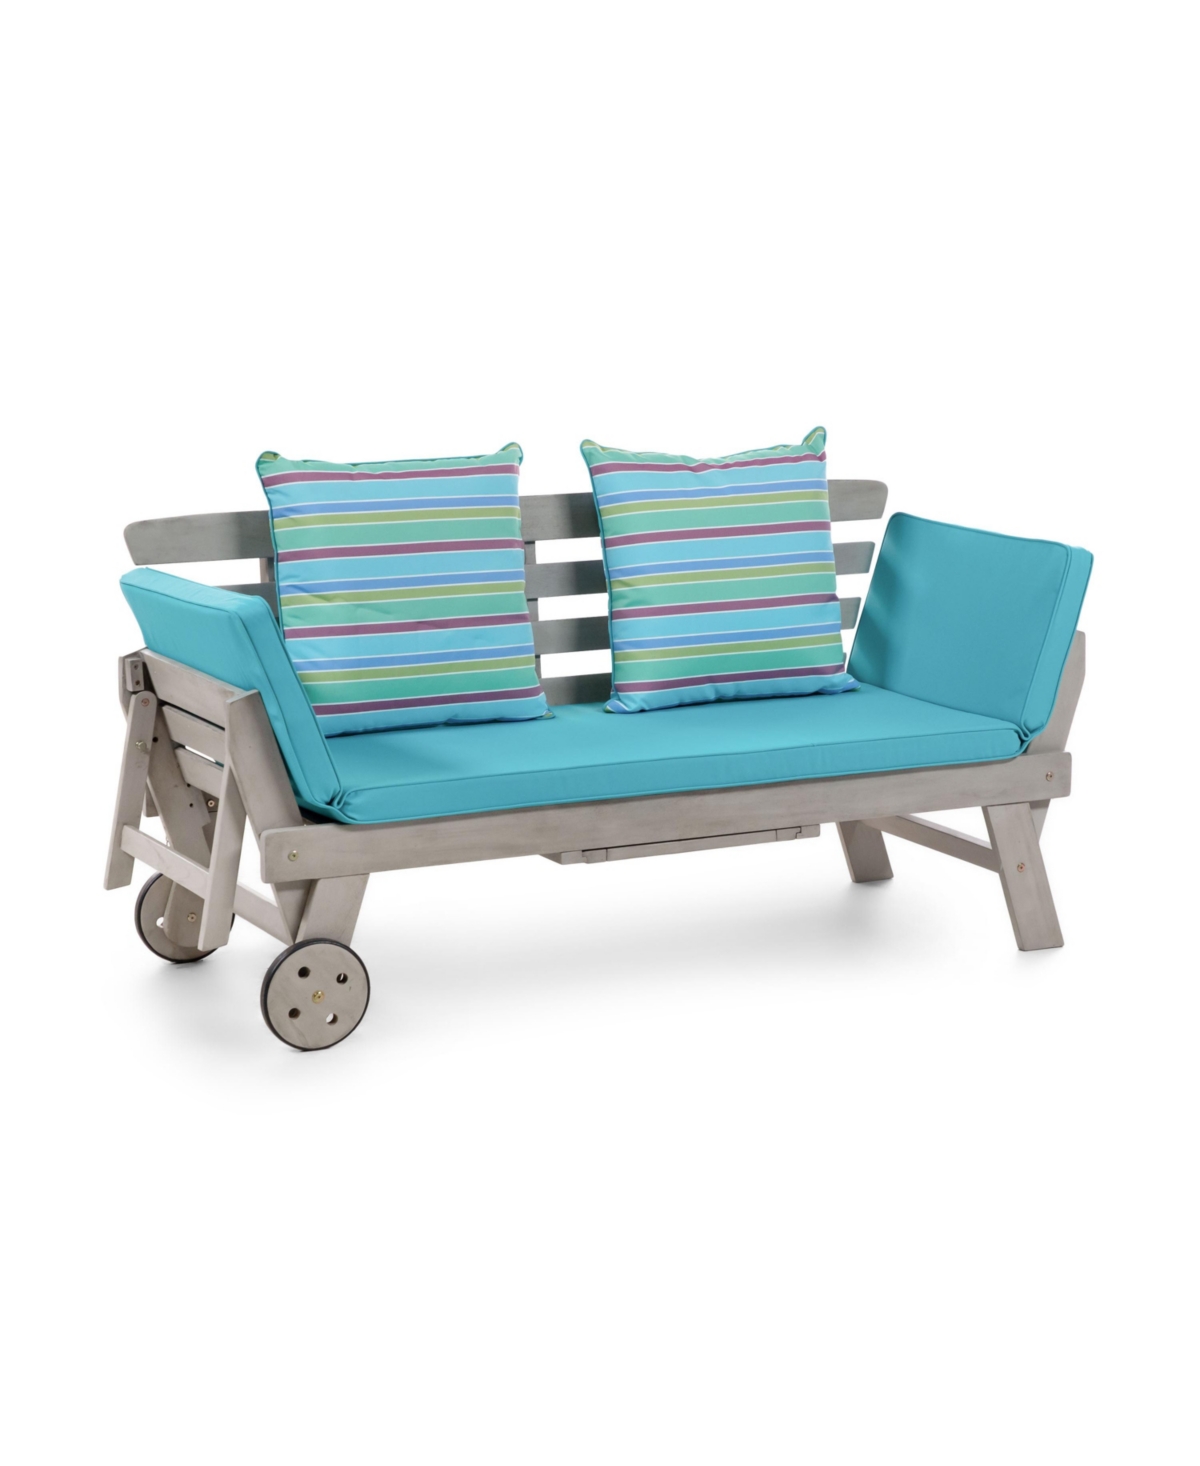 Furniture Of America 30.75" Acacia Convertible Mobile Patio Sofa Daybed With Cushions In Turquoise